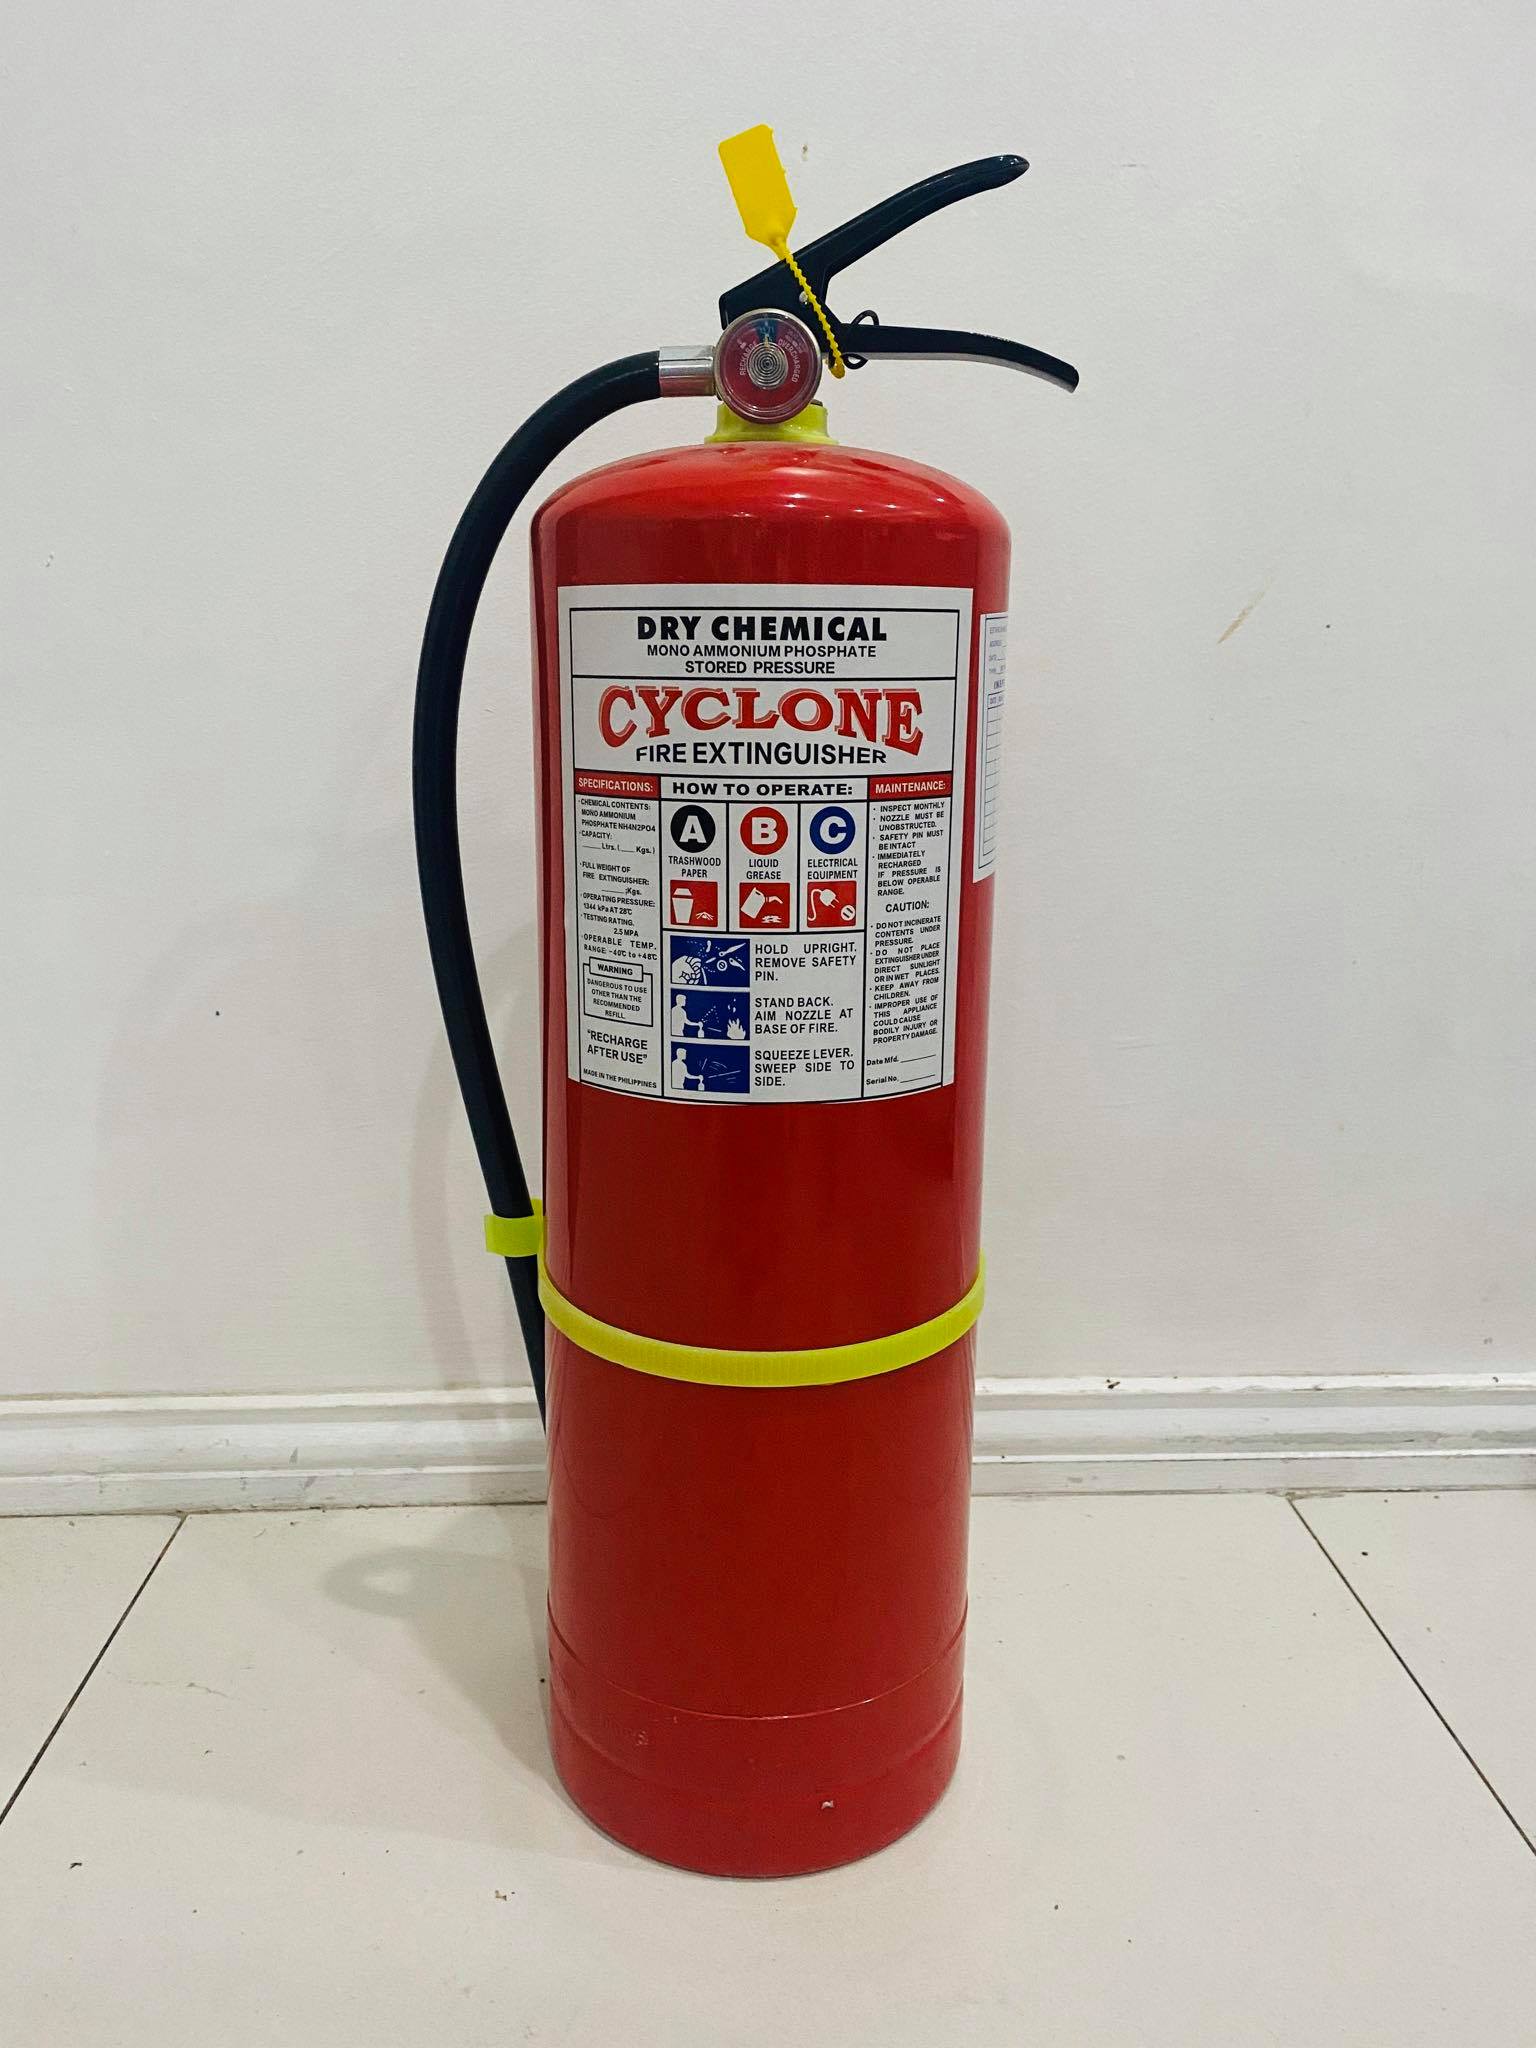 Fire Extinguisher Abc Dry Chemical 20lbs Fire Extinguisher 20 Lbs Brand Cyclone Free Wall 6436